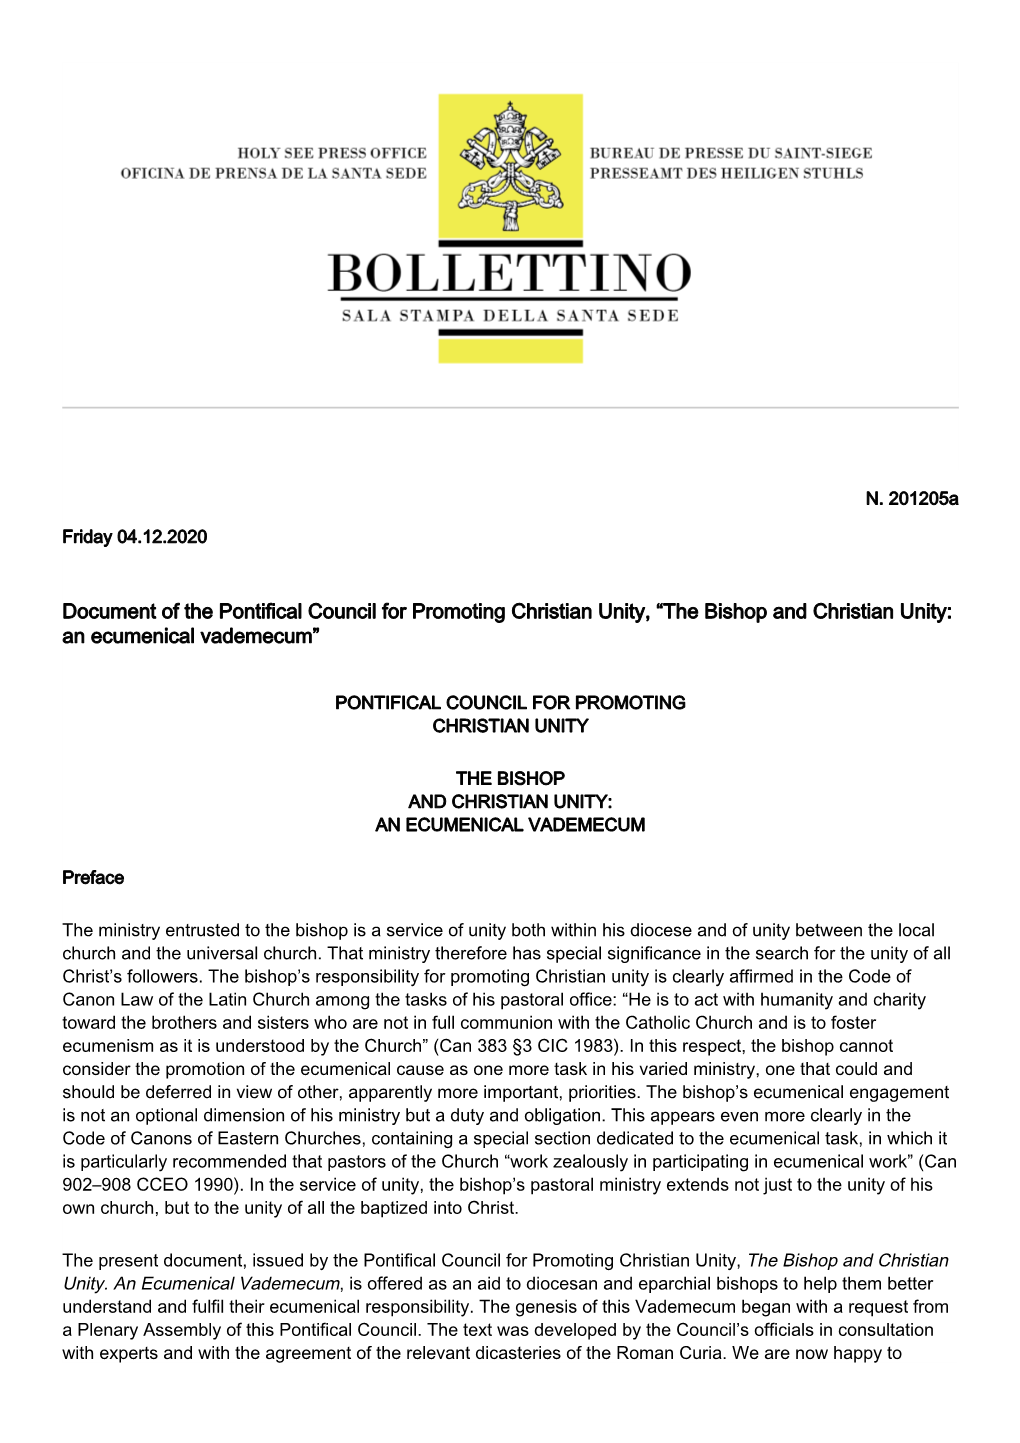 Document of the Pontifical Council for Promoting Christian Unity, “The Bishop and Christian Unity: an Ecumenical Vademecum”